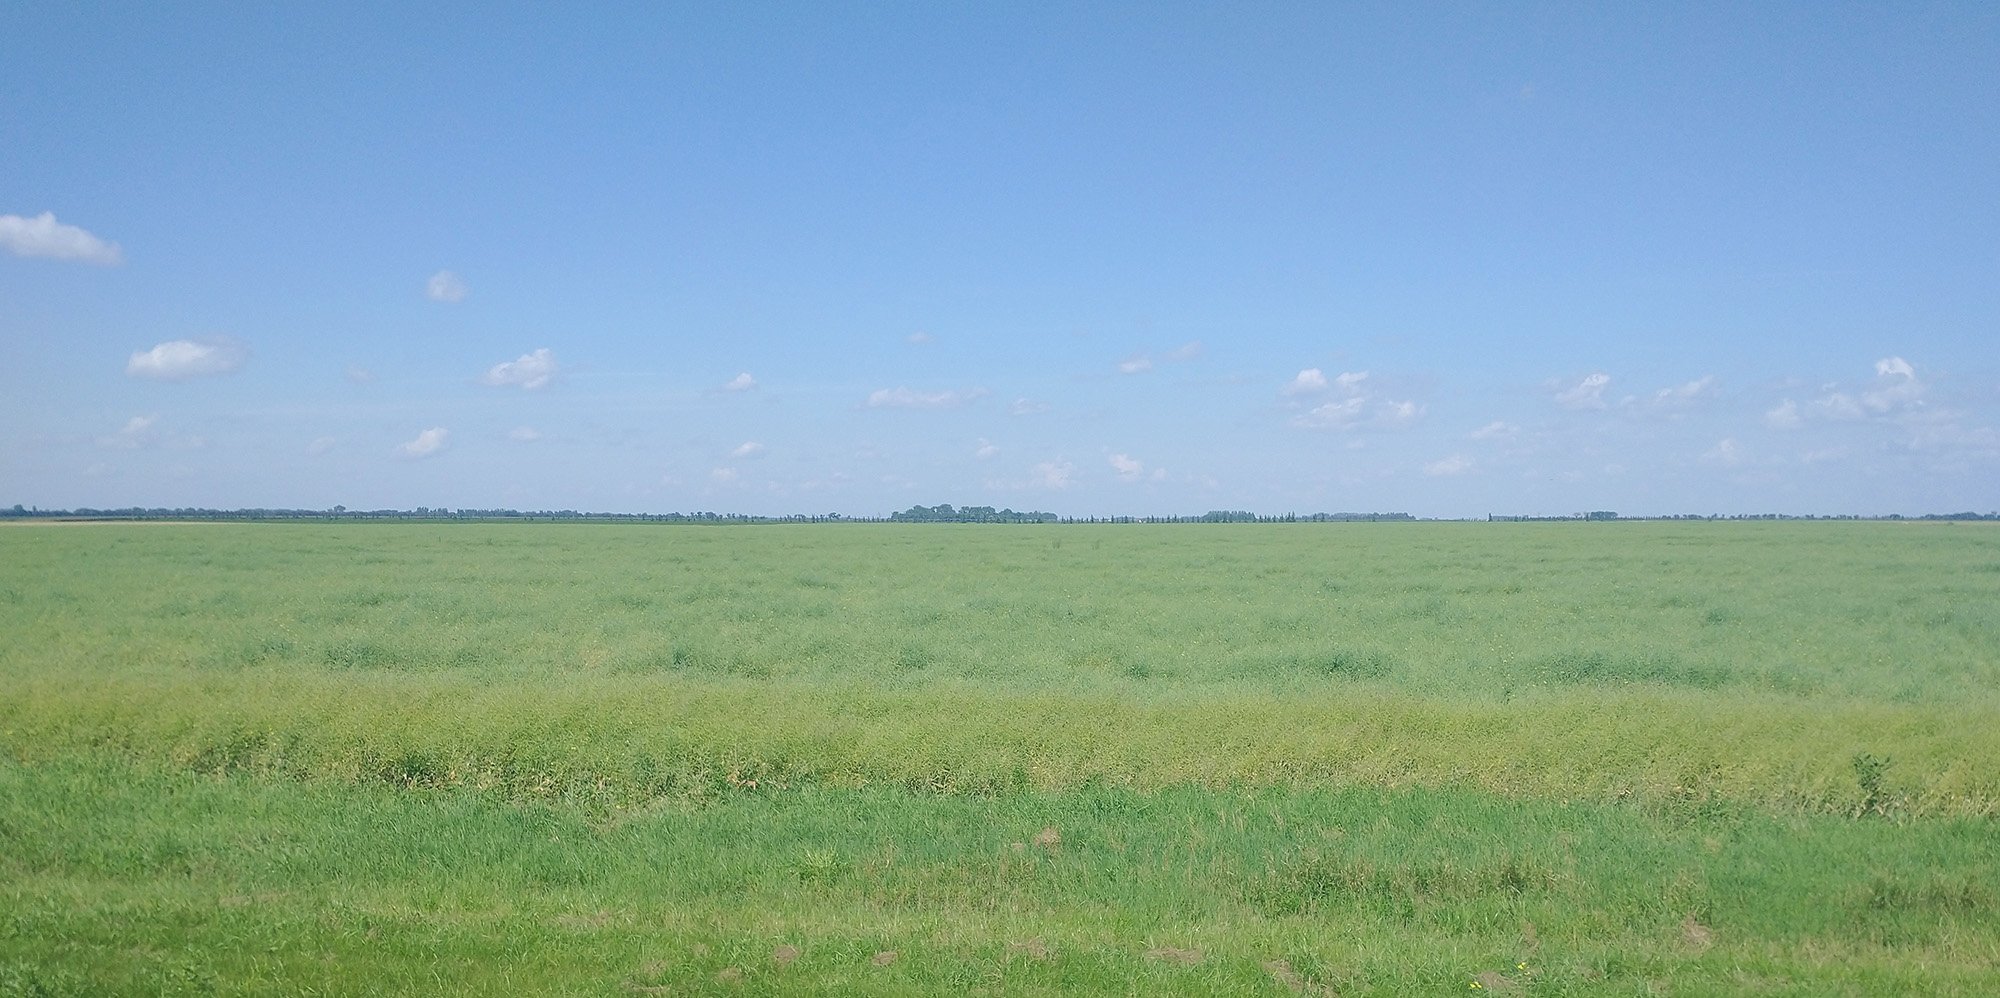 Now we begin our long windy rectangle ride... Typical Manitoba green fields all around. 